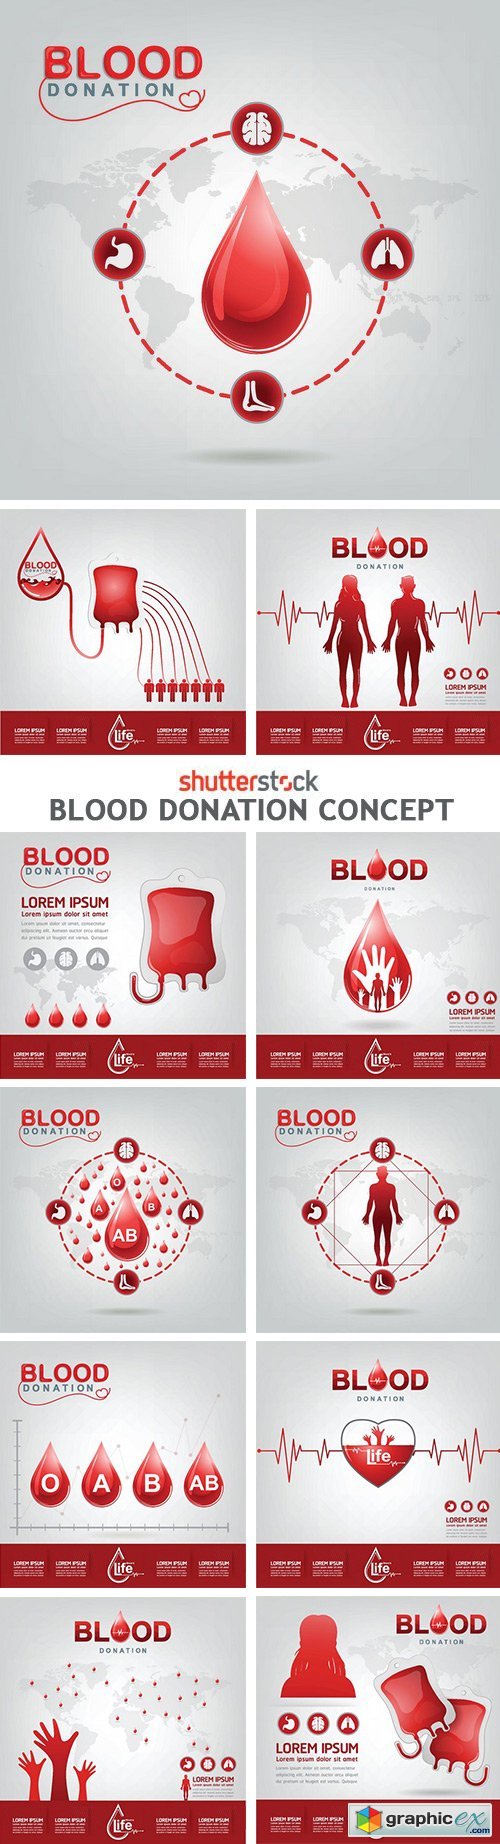 Blood Donation Concept - 25xEPS